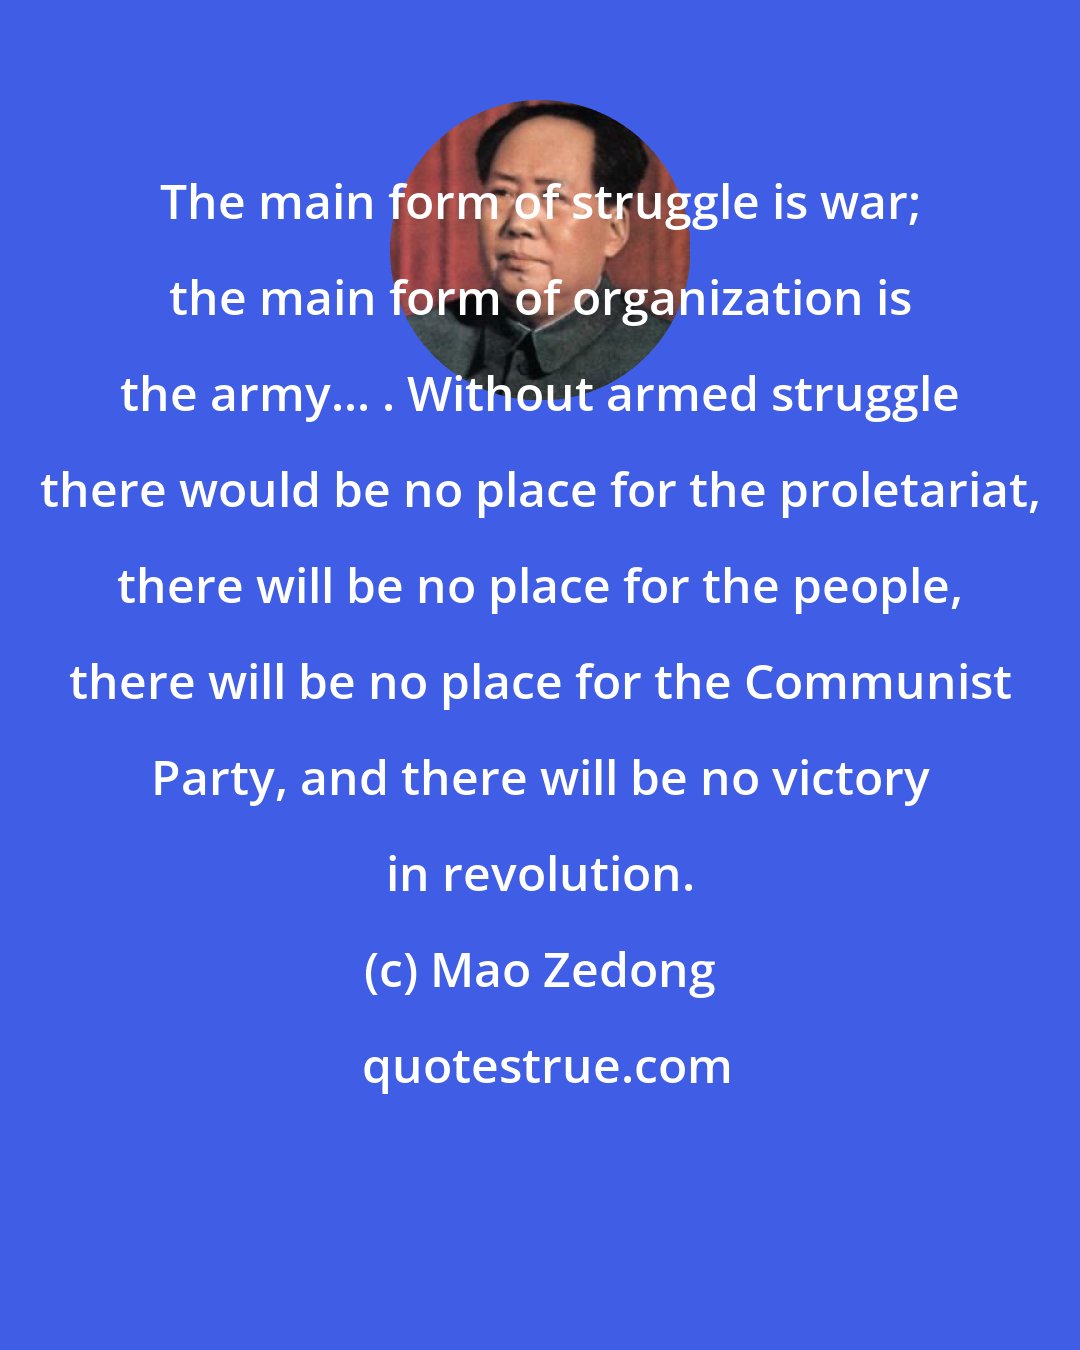 Mao Zedong: The main form of struggle is war; the main form of organization is the army... . Without armed struggle there would be no place for the proletariat, there will be no place for the people, there will be no place for the Communist Party, and there will be no victory in revolution.